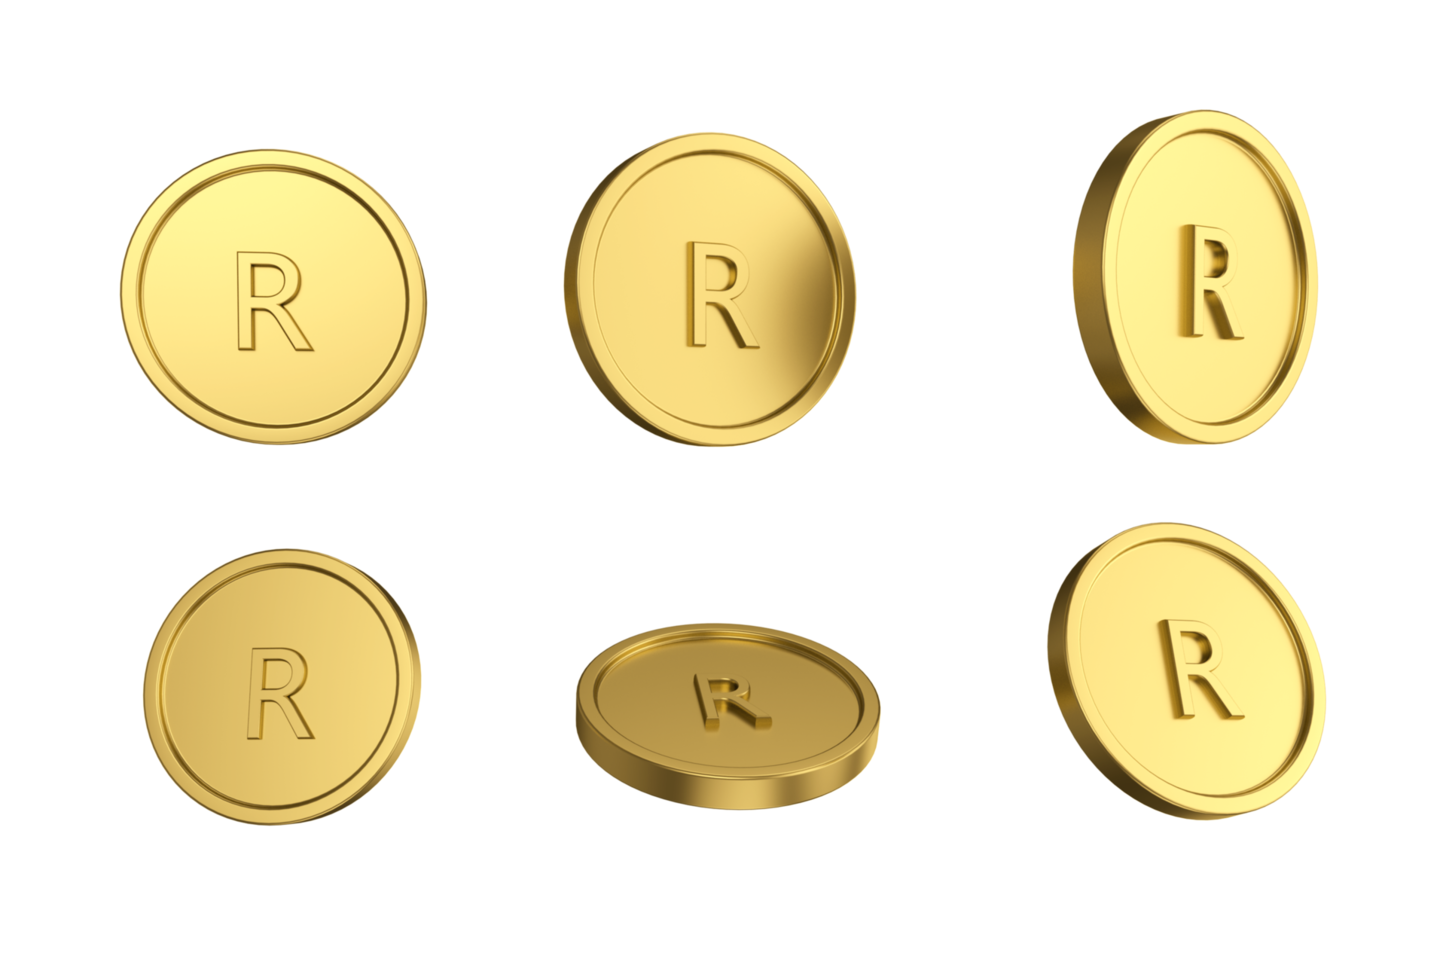 3d illustration Set of gold South african rand coin in different angels png